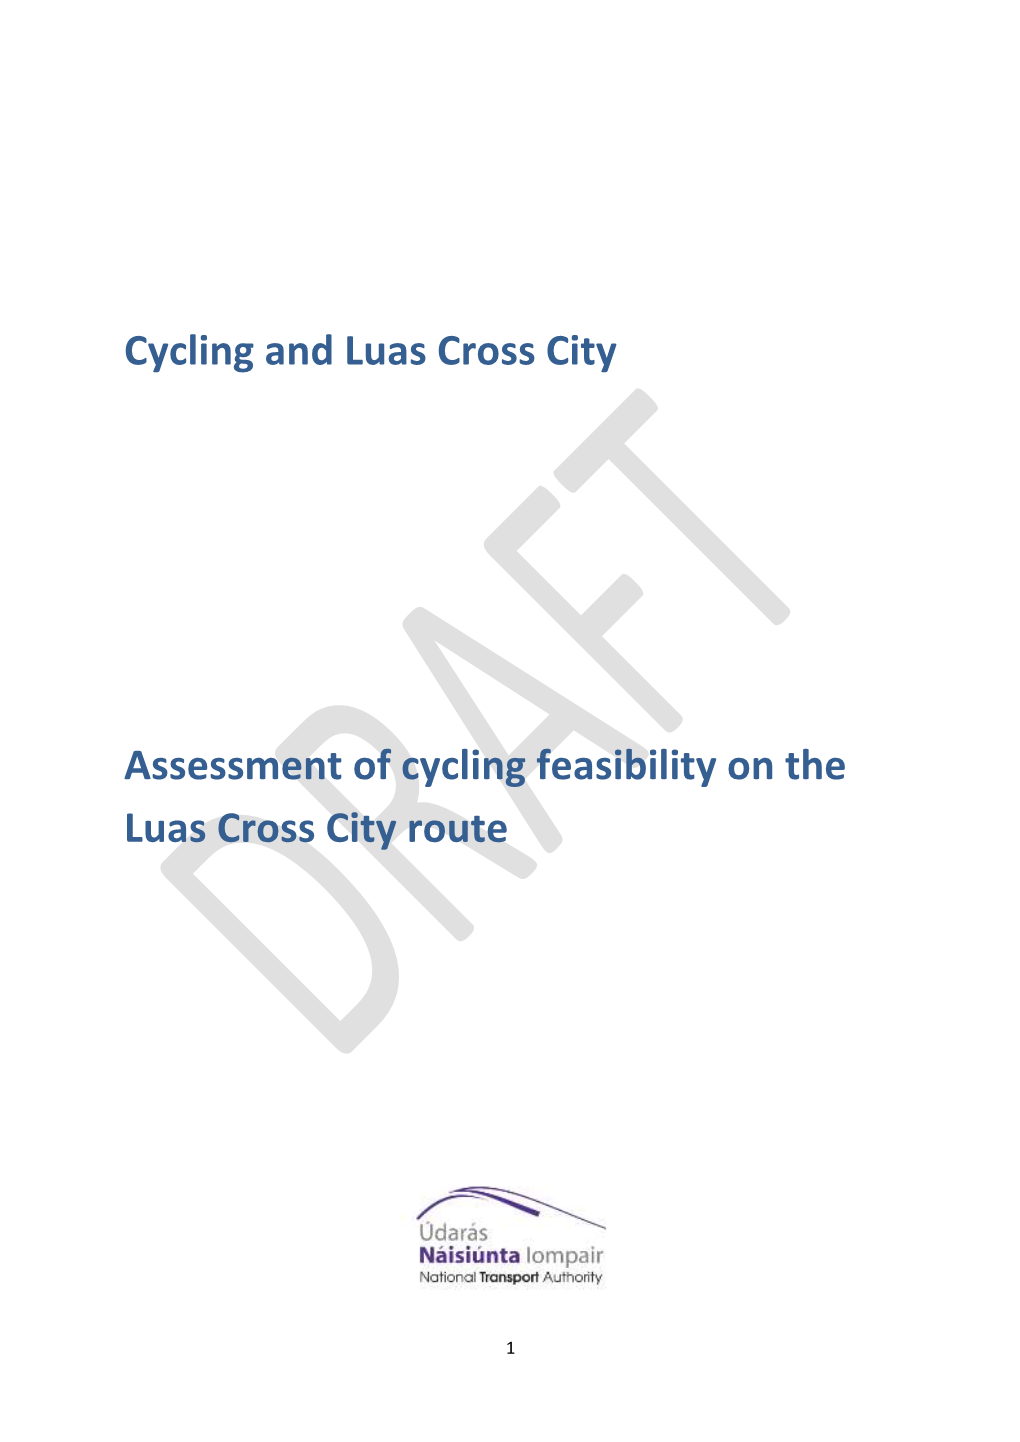 Cycling and Luas Cross City